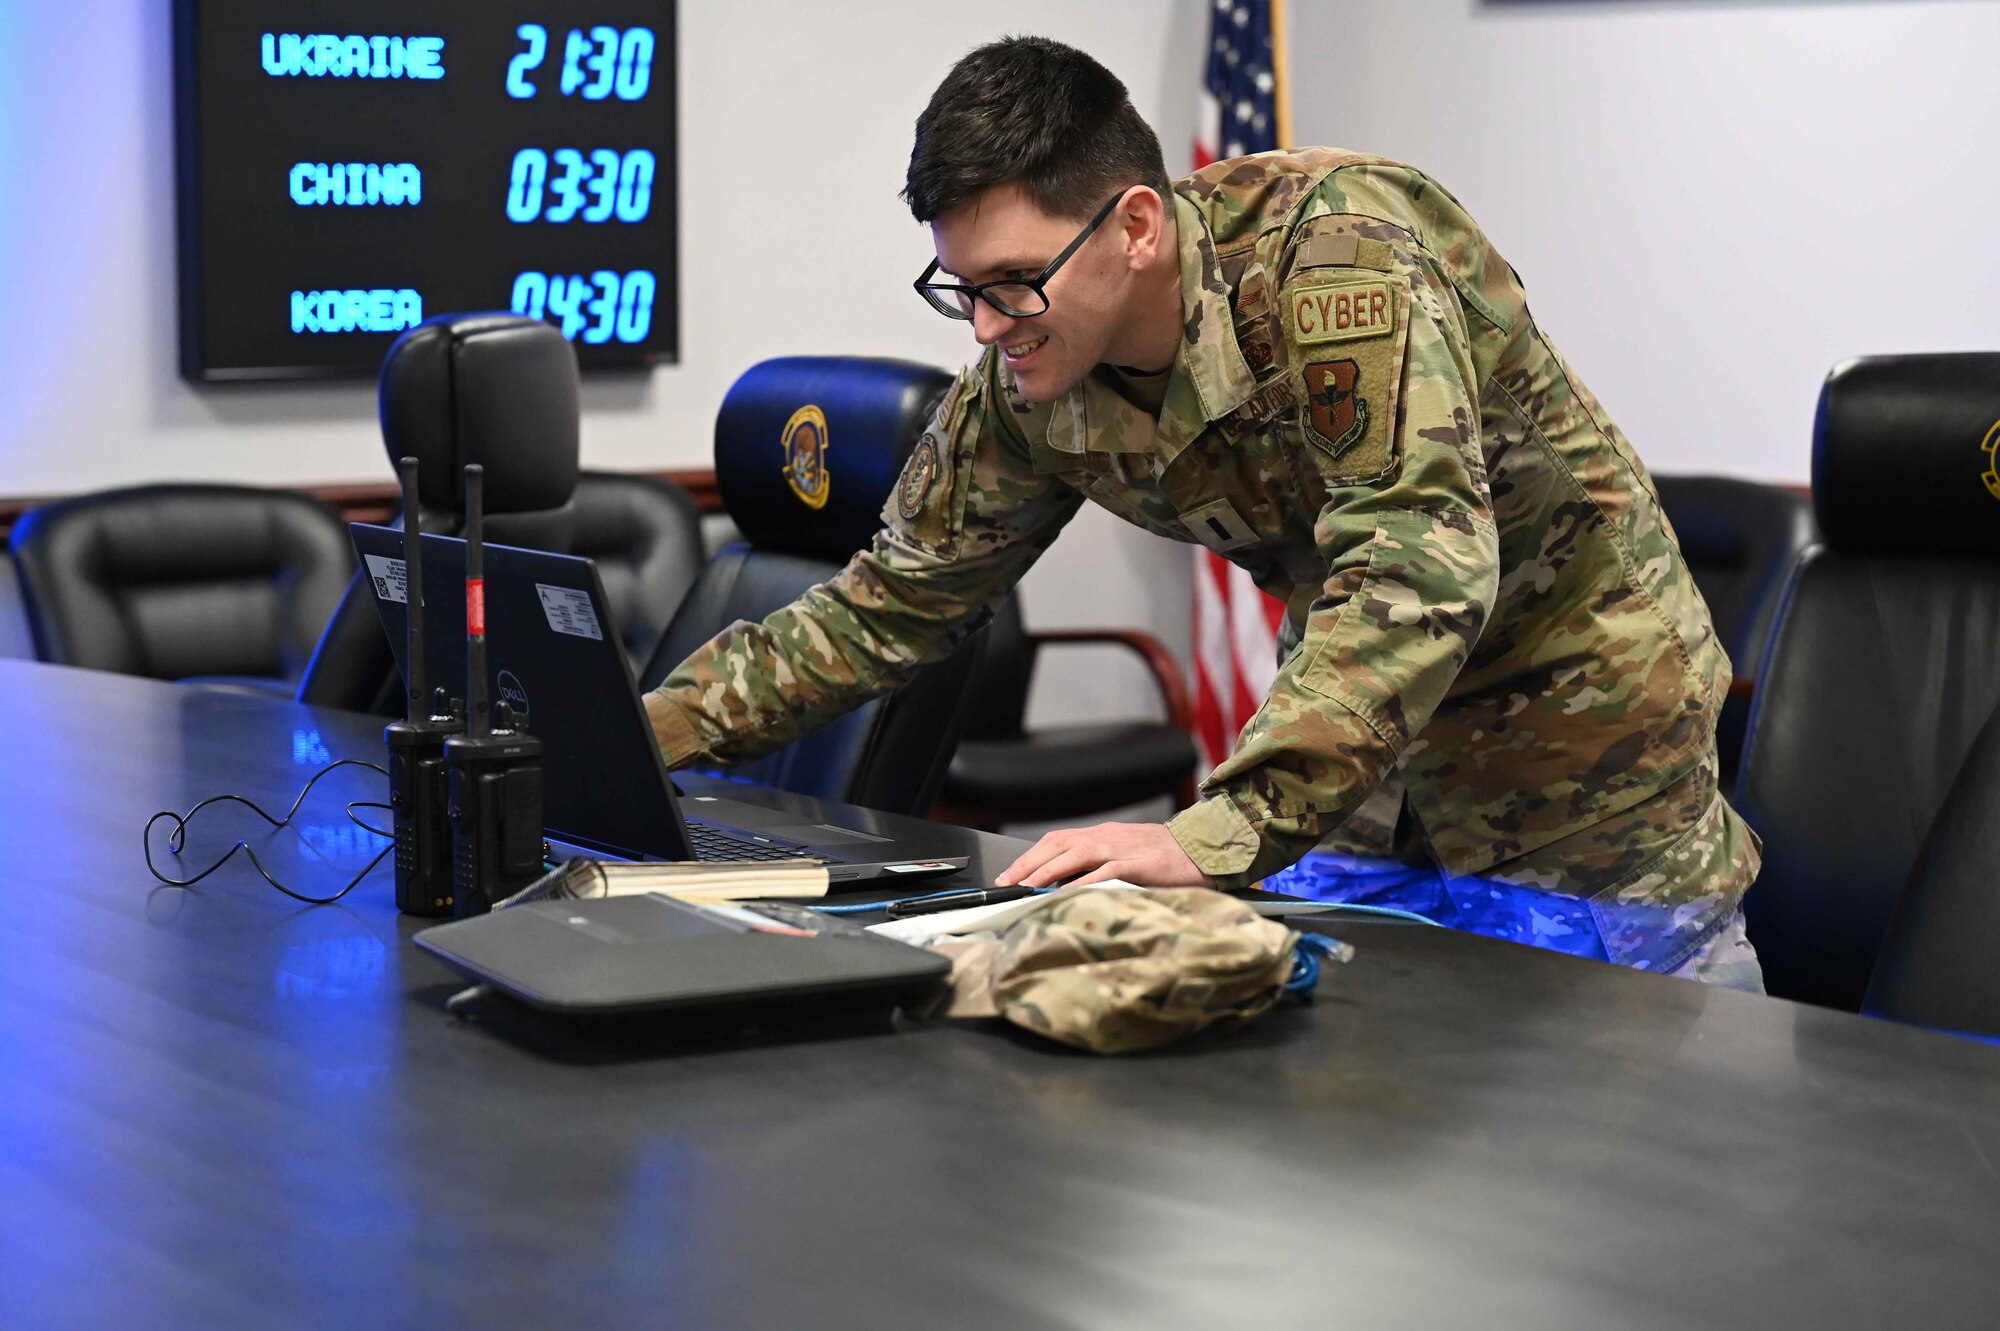 U.S. Air Force 1st Lt. Alexander Franco, 97th Communications Squadron (CS) officer in charge of quality assurance, does a last-minute check before announcing the start of a readiness exercise at Altus Air Force Base, Oklahoma, Feb. 23, 2023. The 97 CS Airmen began their exercise in mission-oriented protective posture gear level zero, which includes normal uniform, helmets, and vests. (U.S. Air Force photo by Airman 1st Class Kari Degraffenreed)